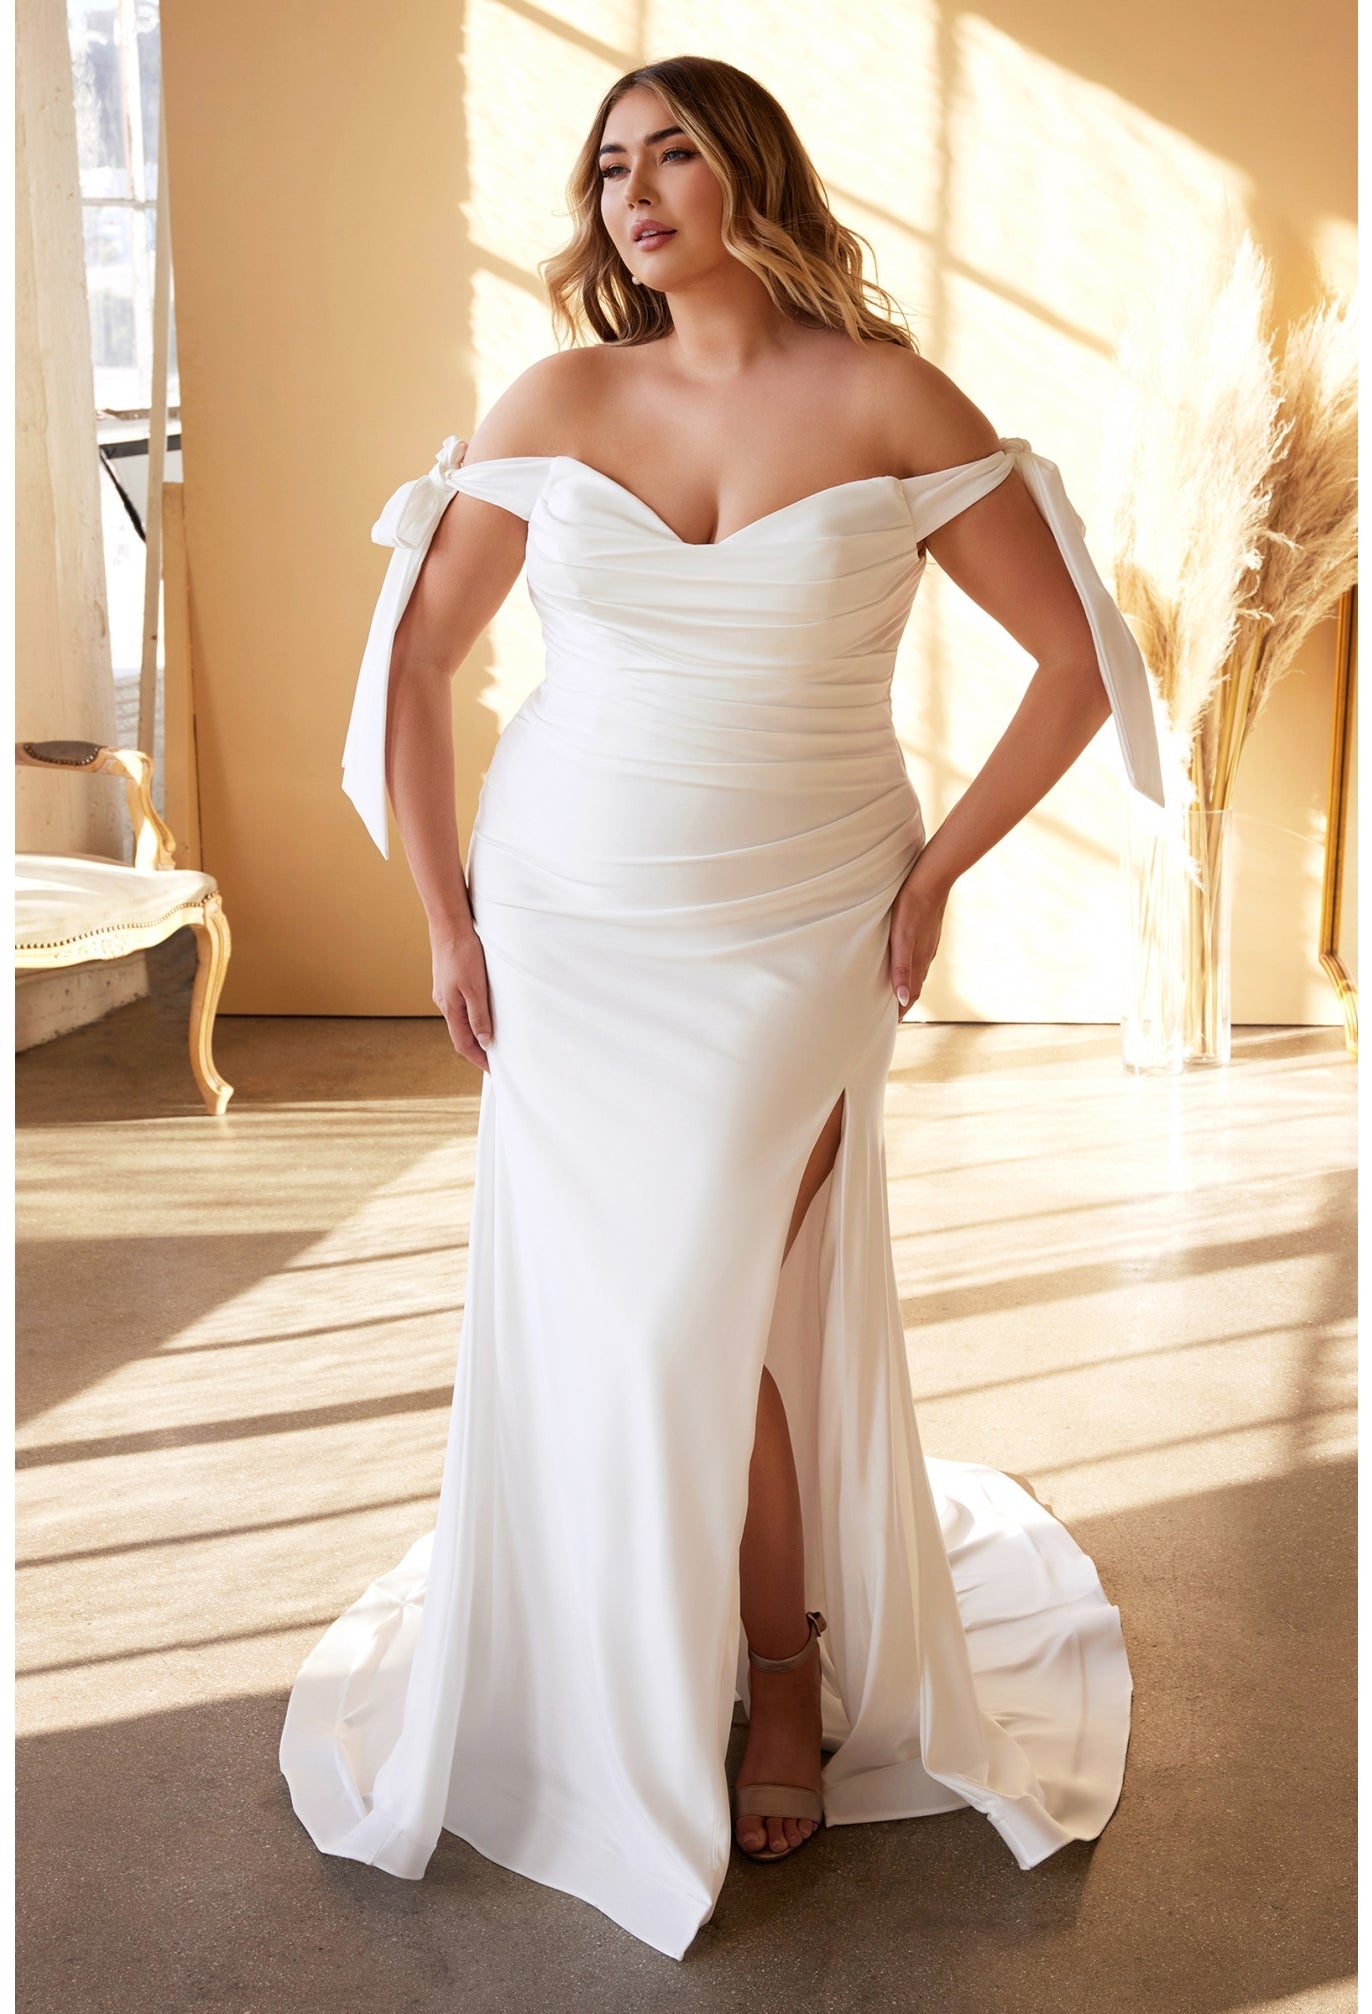 2020 Elegant African Long Sleeves Lace Plus Size Mermaid Wedding Dresses  Scoop Neck Tulle Applique Country Boho Bridal Gowns For Garden From  Beautypalace, $119.28 | DHgate.Com